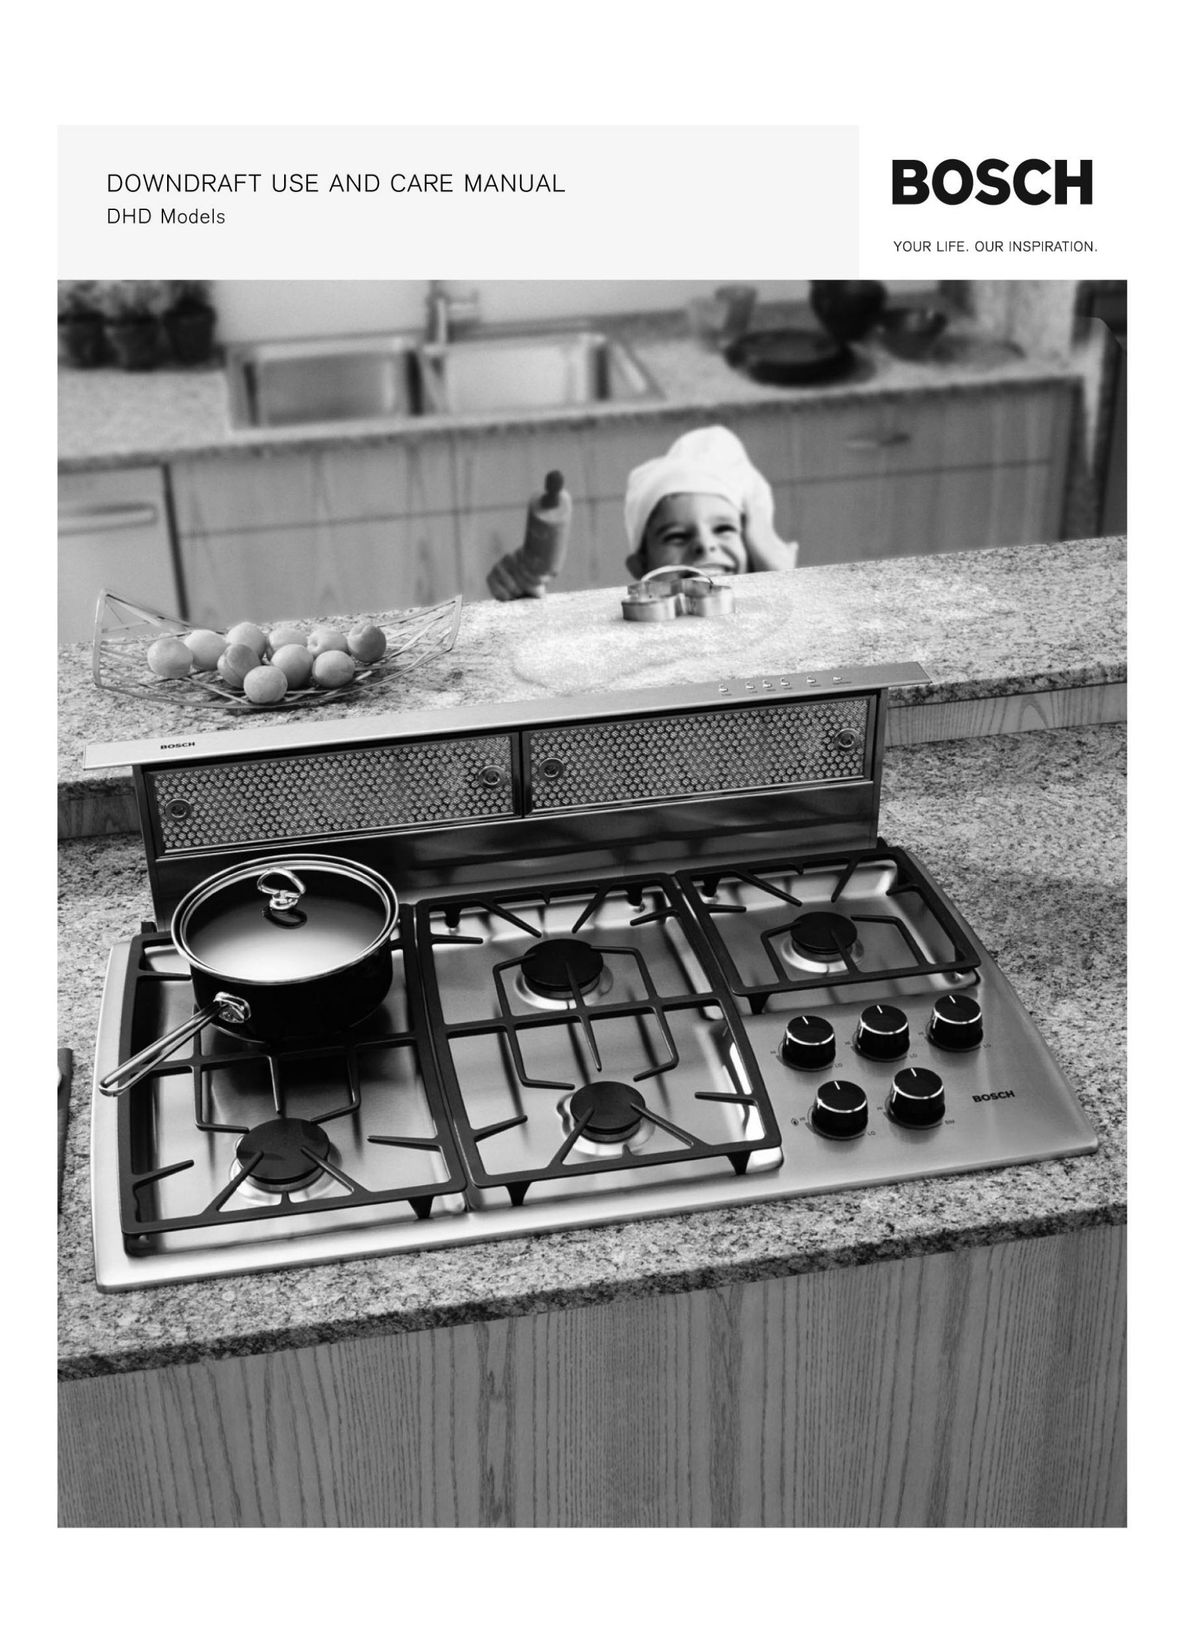 Bosch Appliances DHD Series Cooktop User Manual